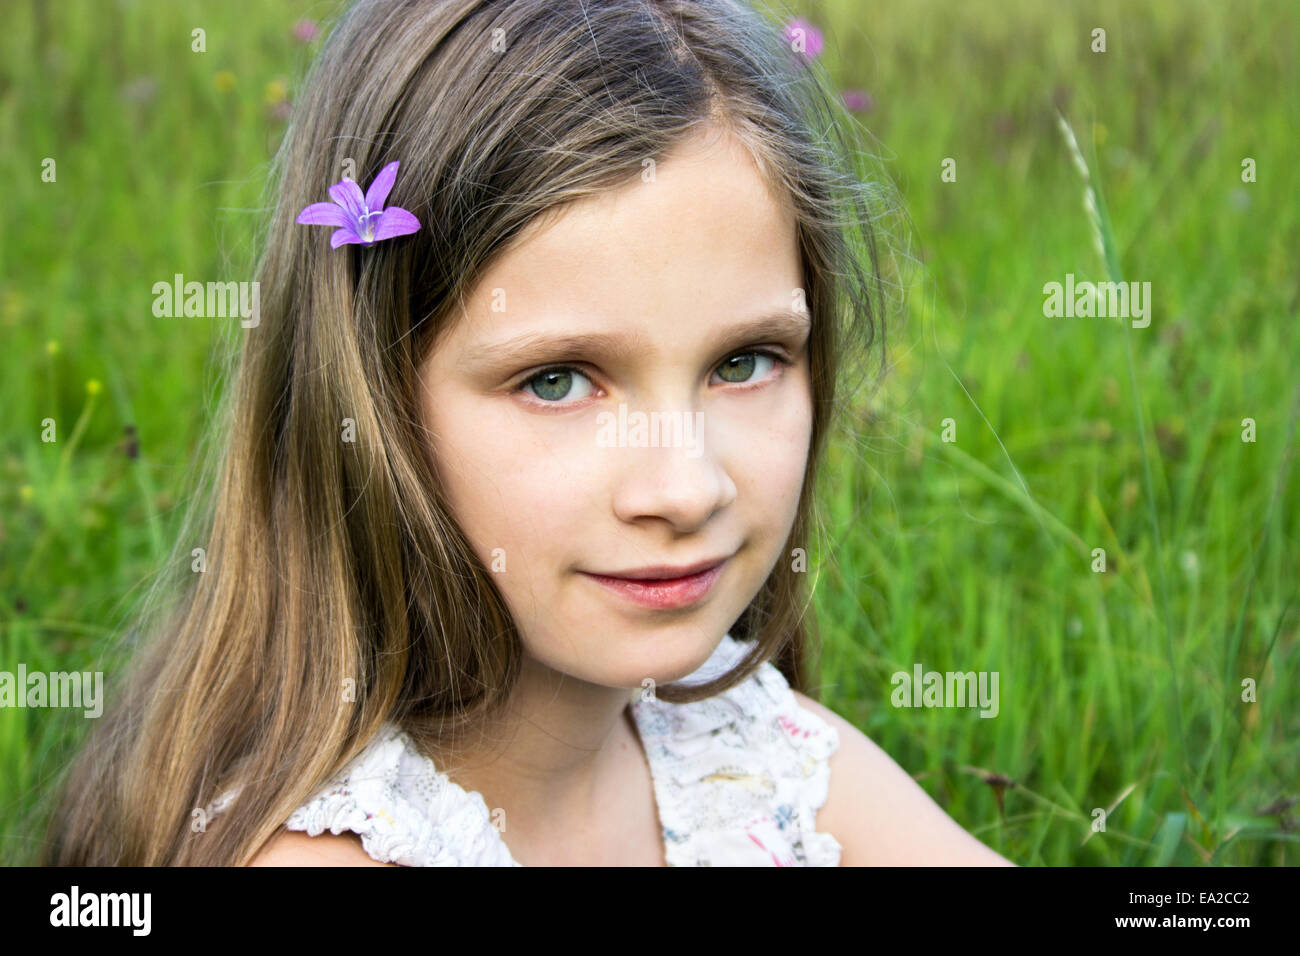 Young, smiling girl in a meadow Stock Photo